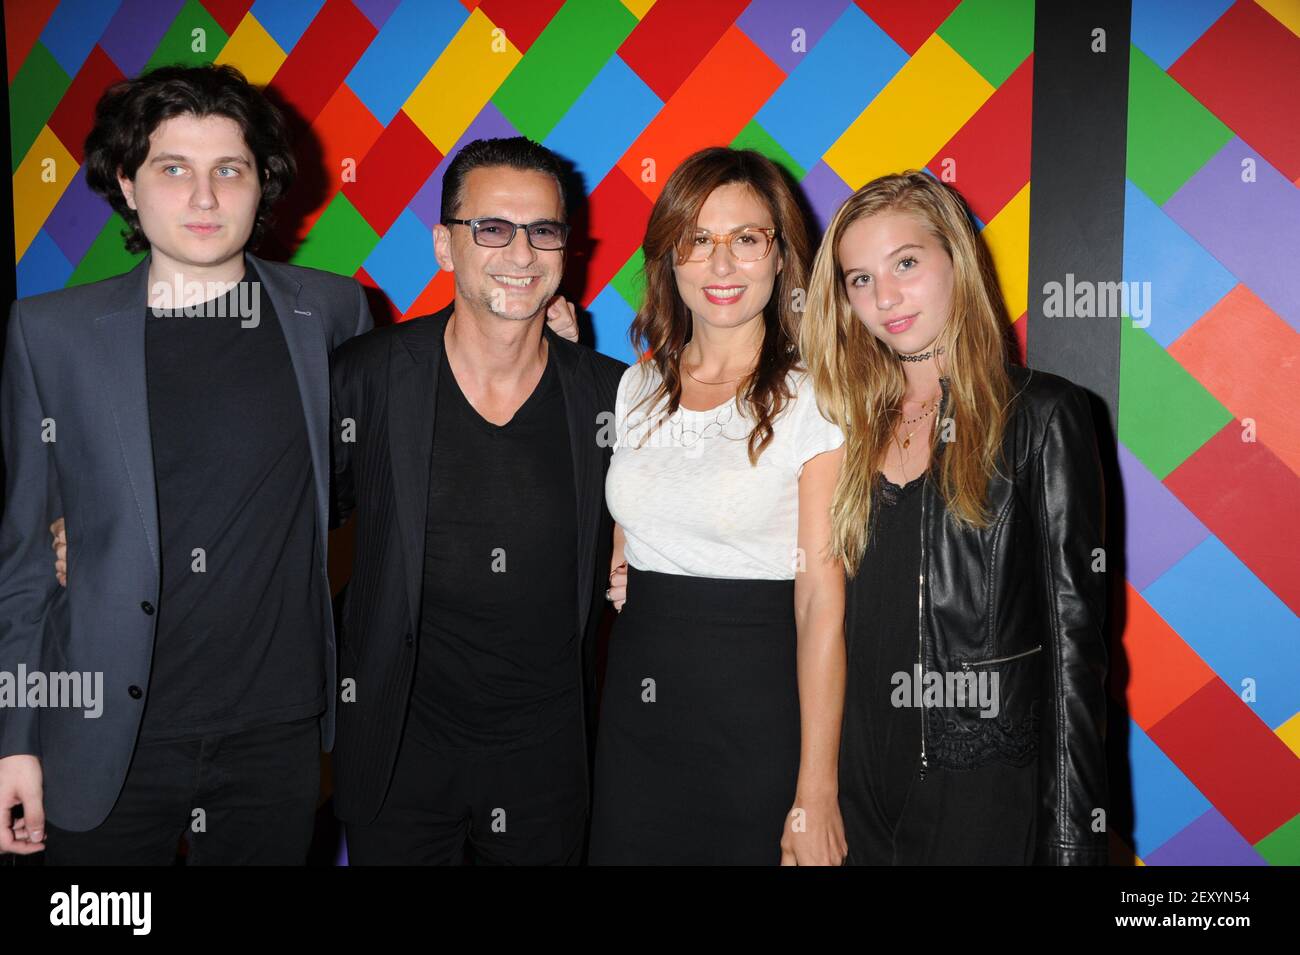 L-R: Jimmy Gahan, Dave Gahan, Jennifer Sklias, Stella Rose Gahan arrives to  the A Most Wanted Man New York Premiere, held at They Museum of Modern Art  in New York City, Tuesday,